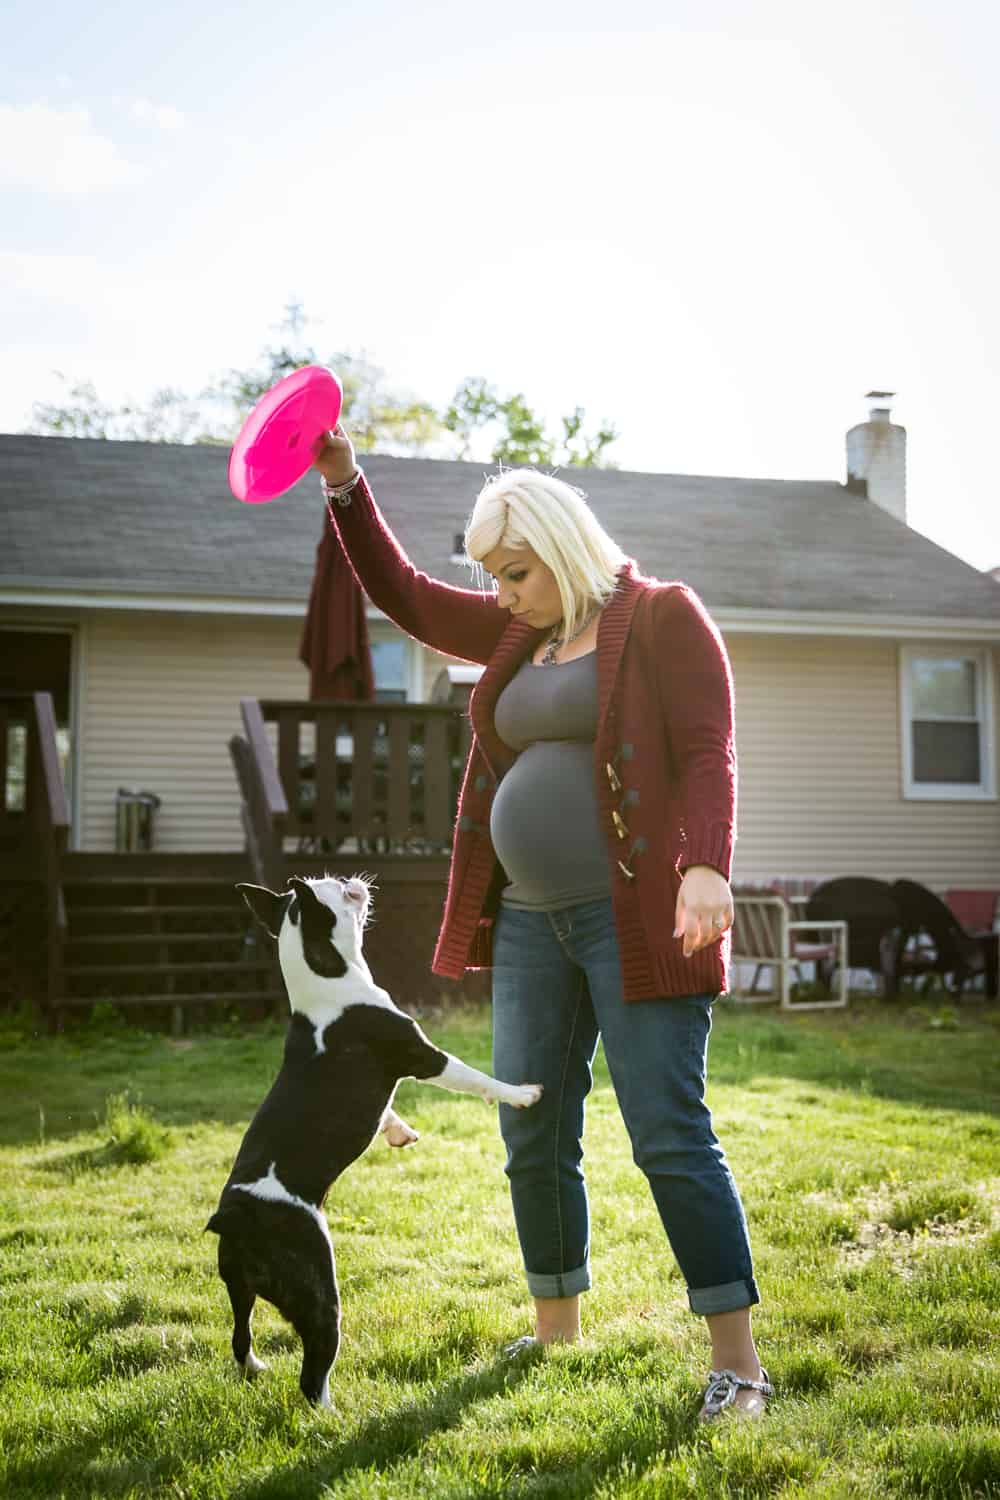 Pregnant woman playing with dog in backyard